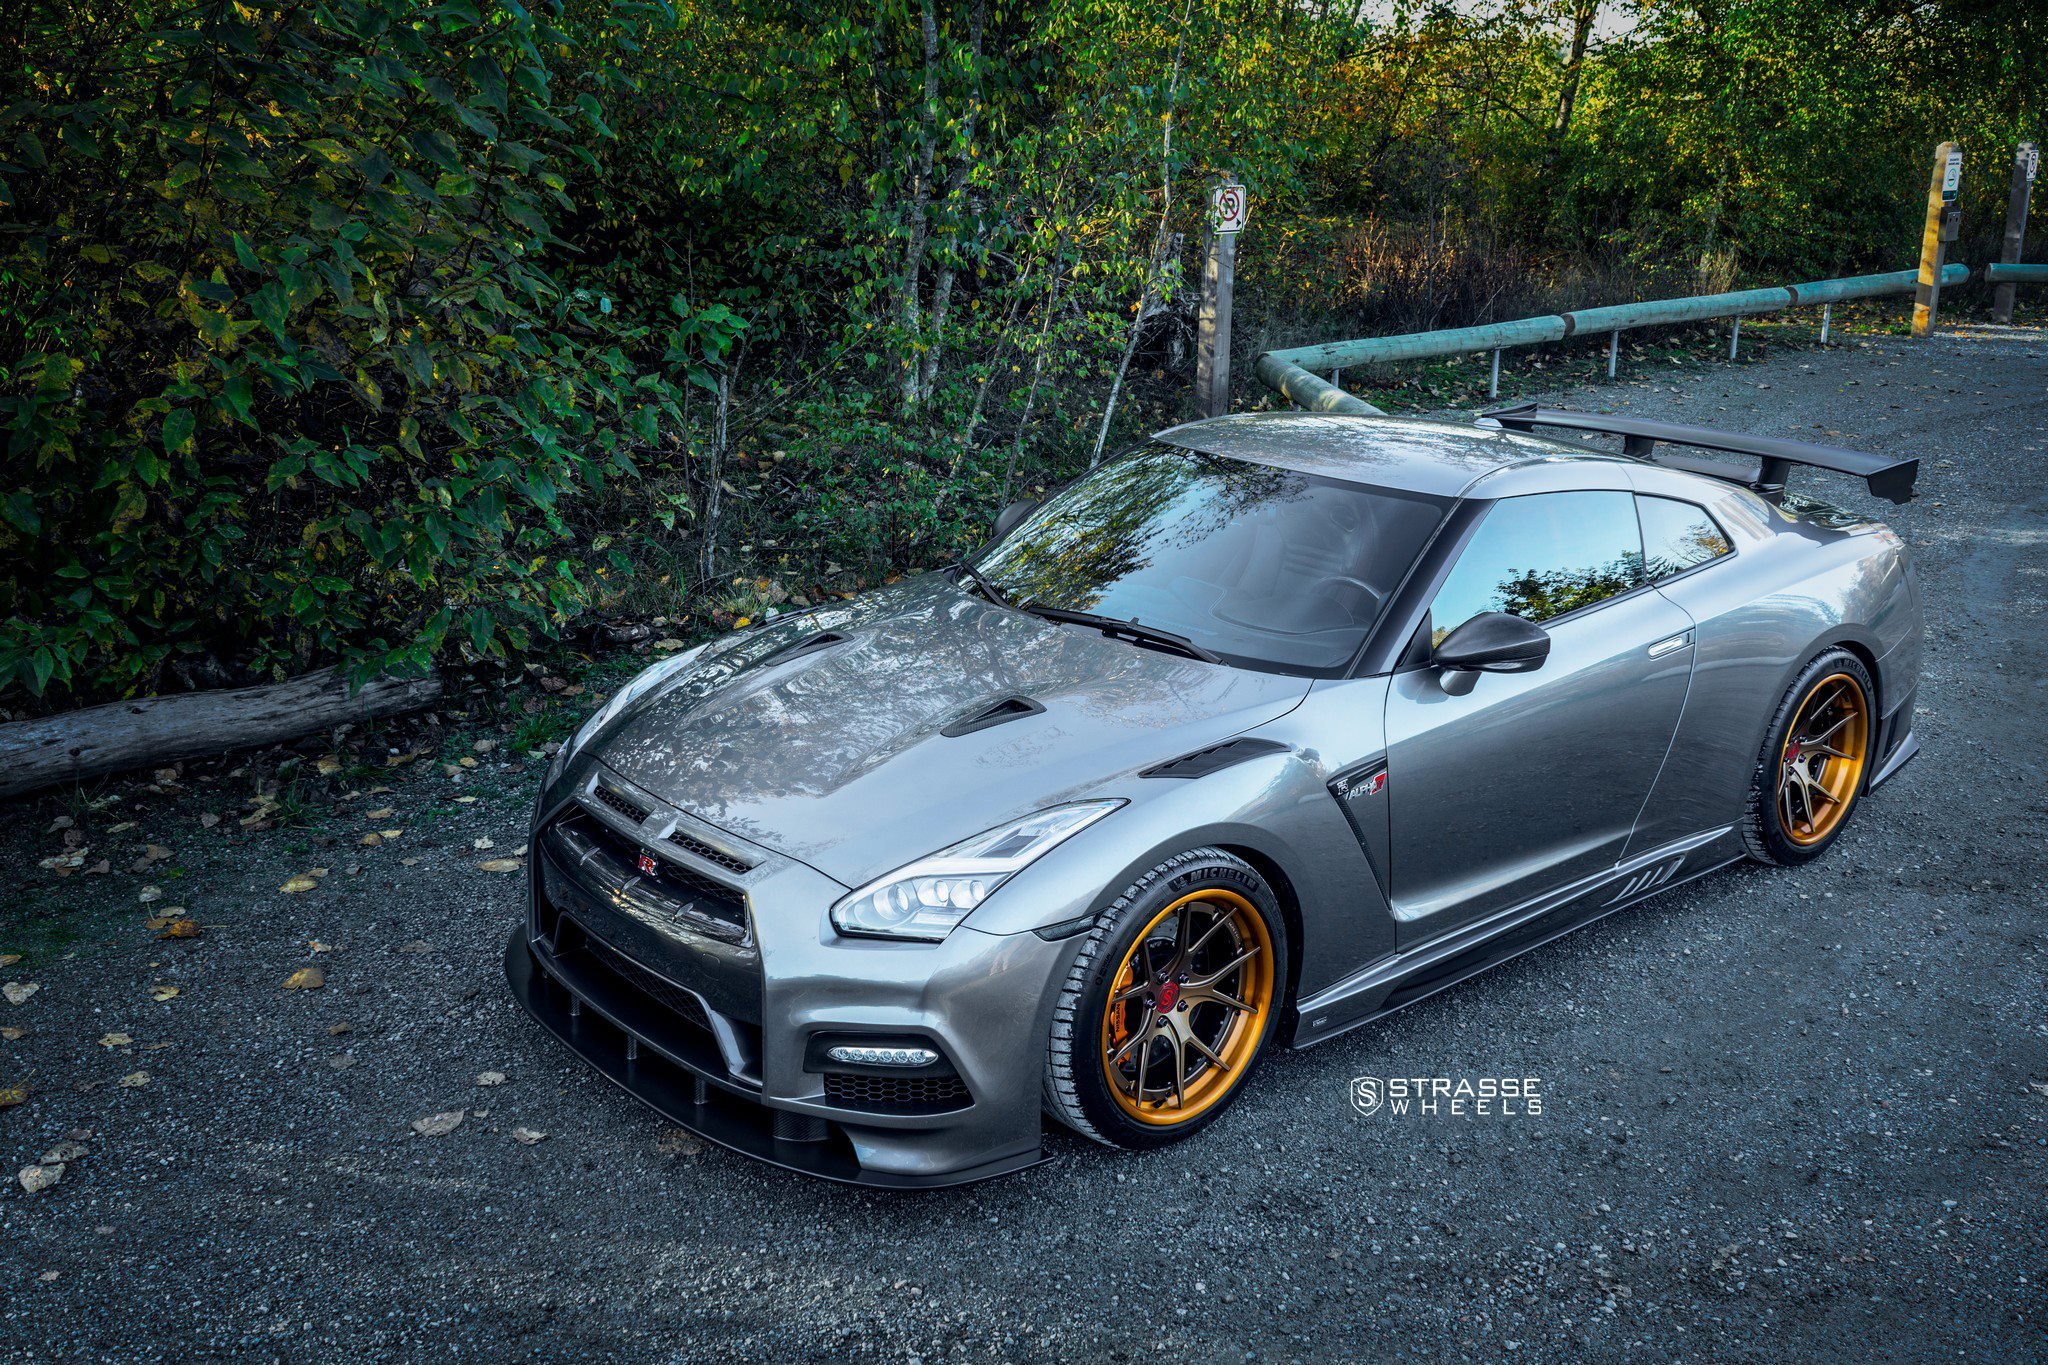 Gray Nissan GT-R with Aftermarket Vented Hood - Photo by Strasse Wheels